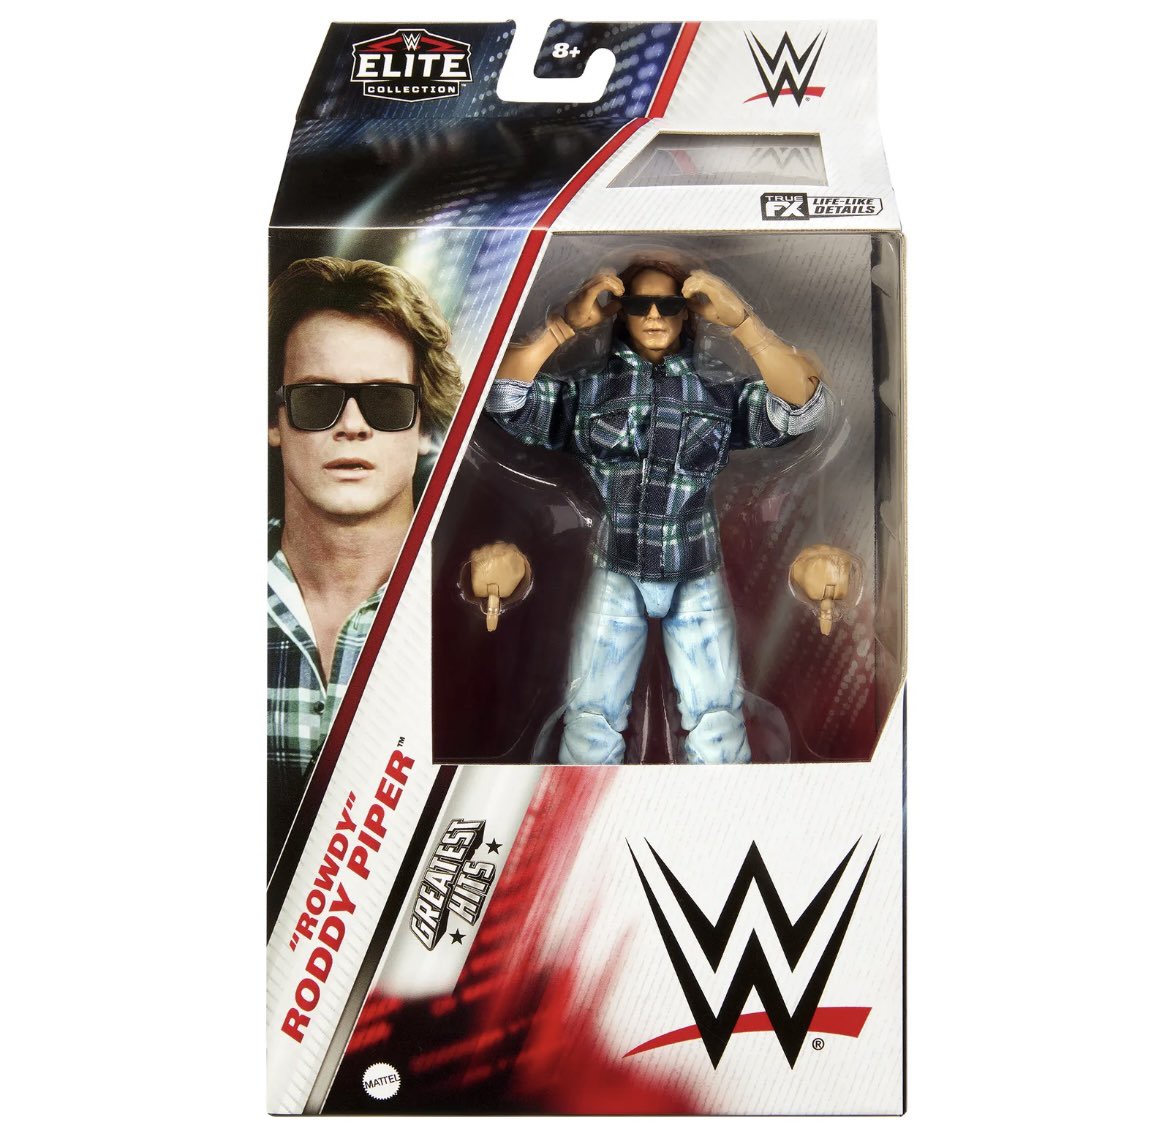 How awesome is the new Roddy Piper WWE Elite?!?!